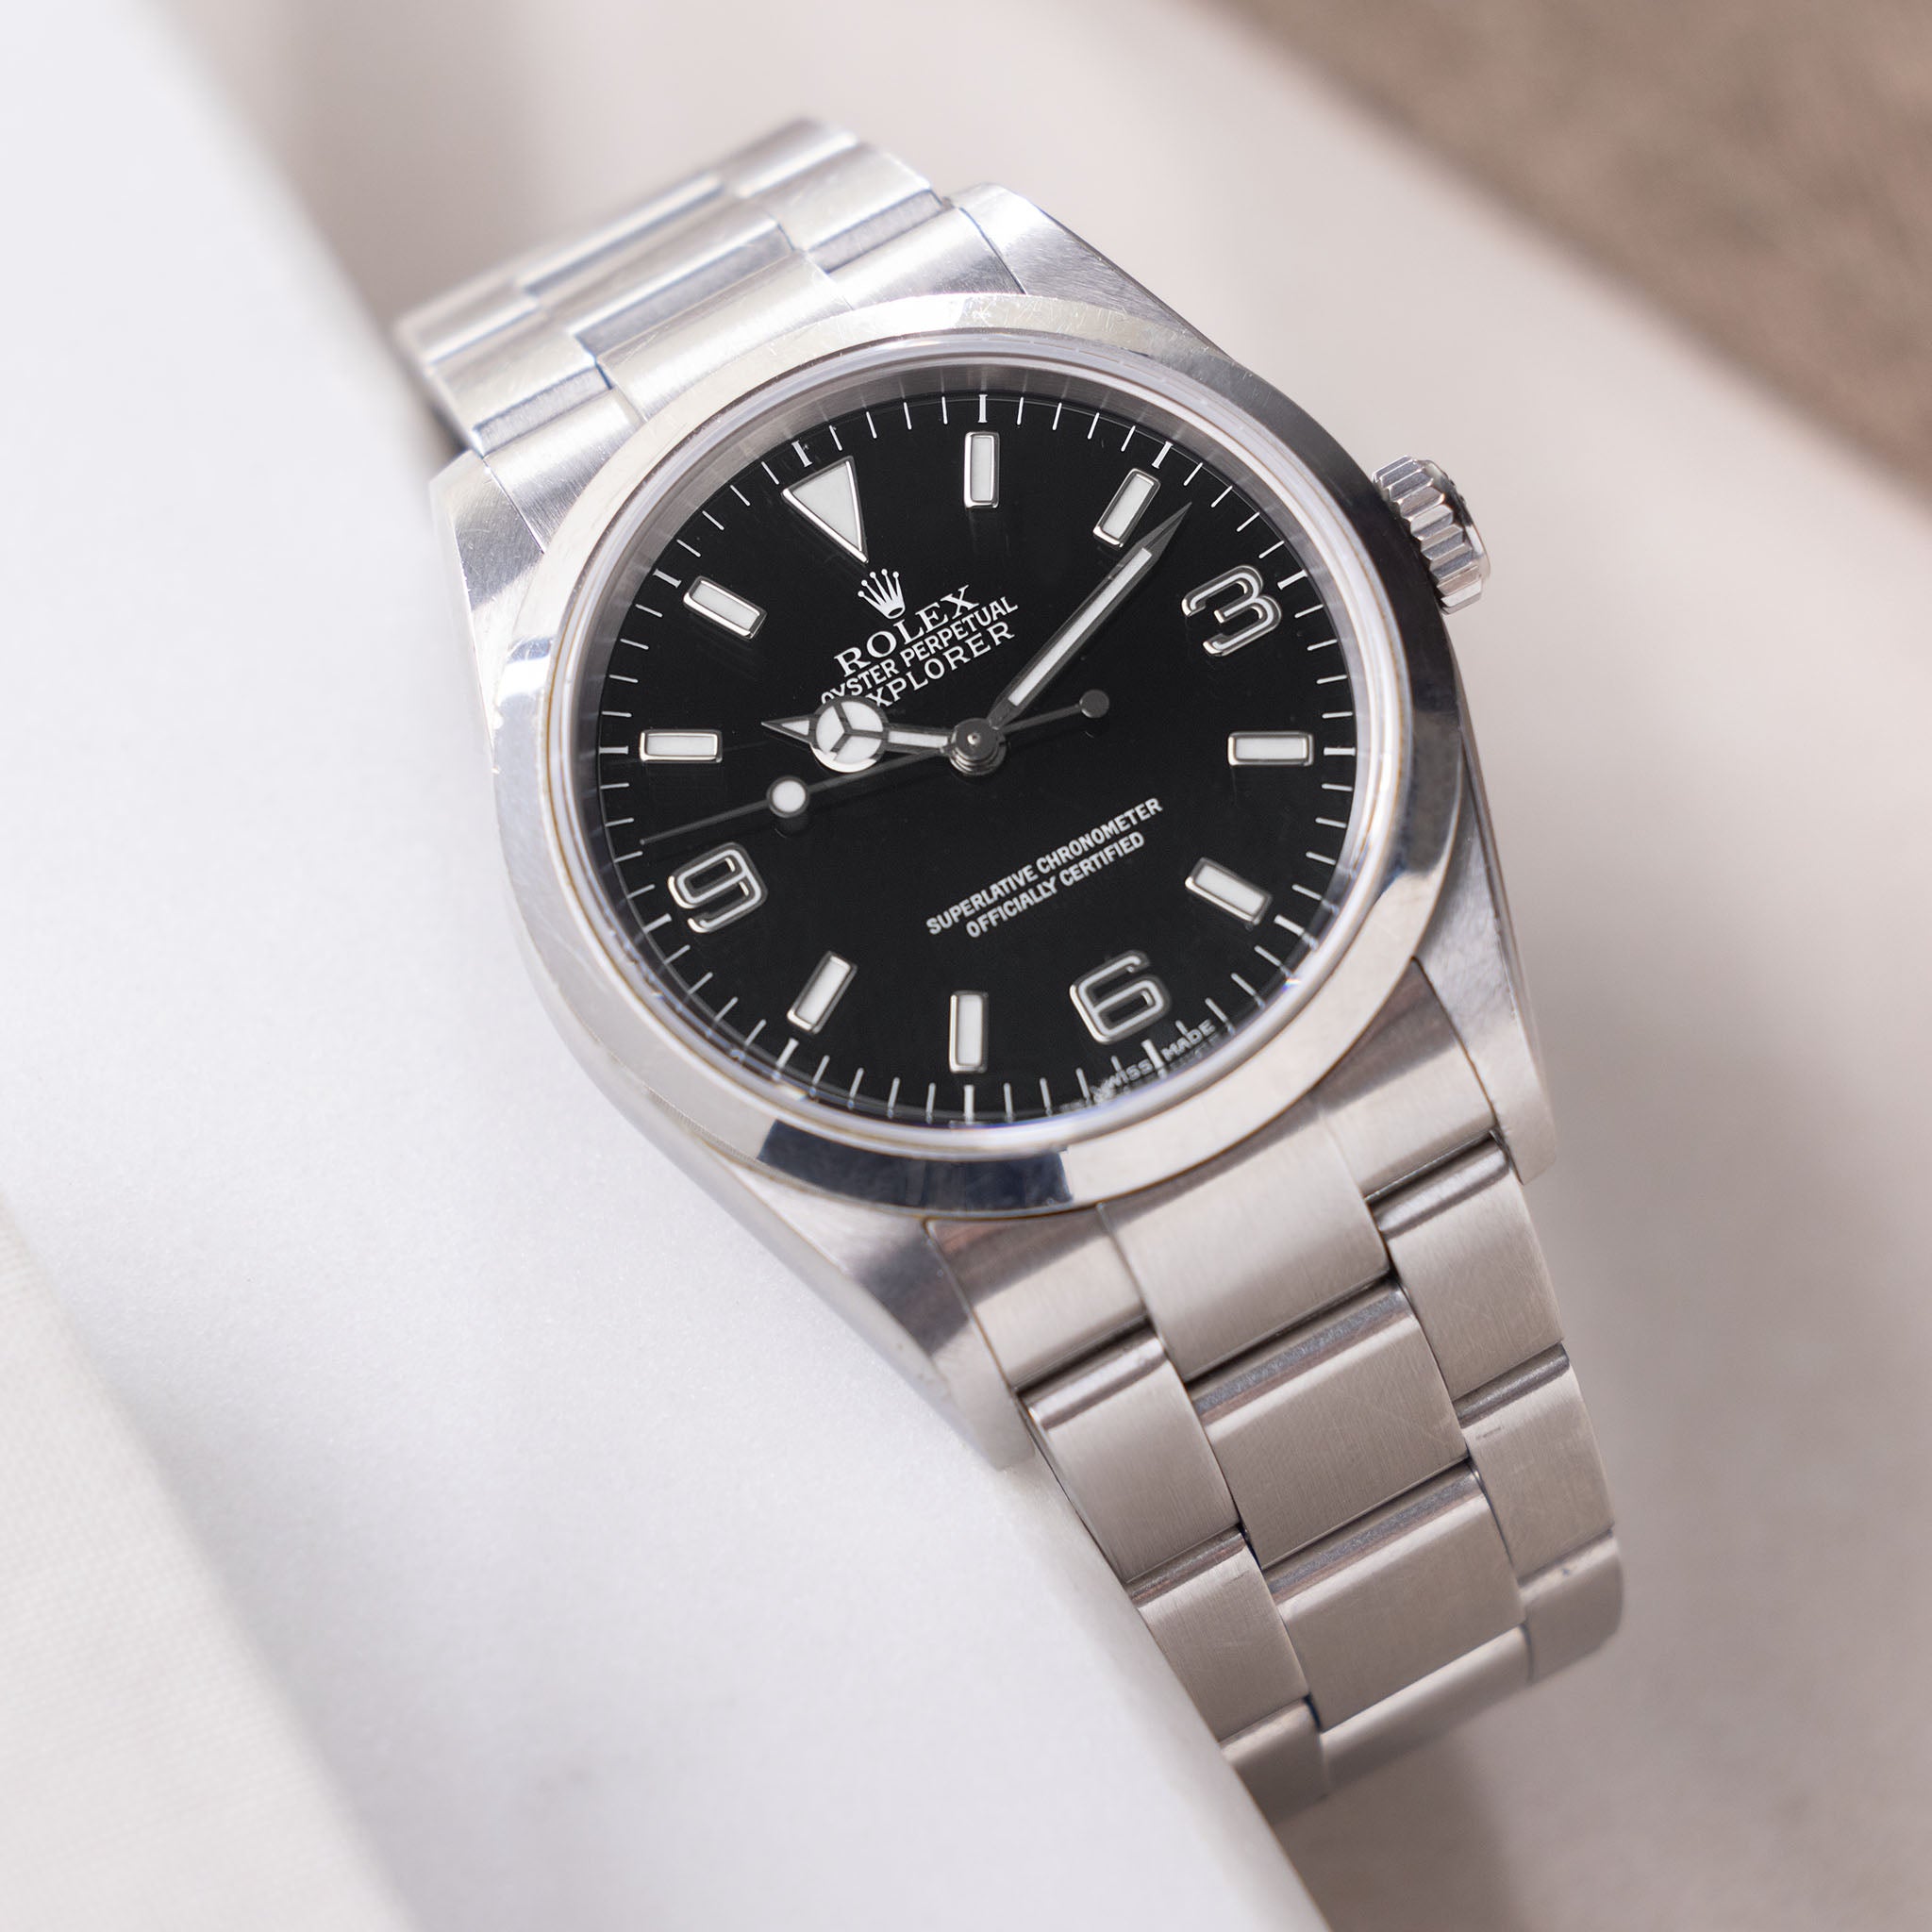 Rolex Explorer 114270 with Box and Papers